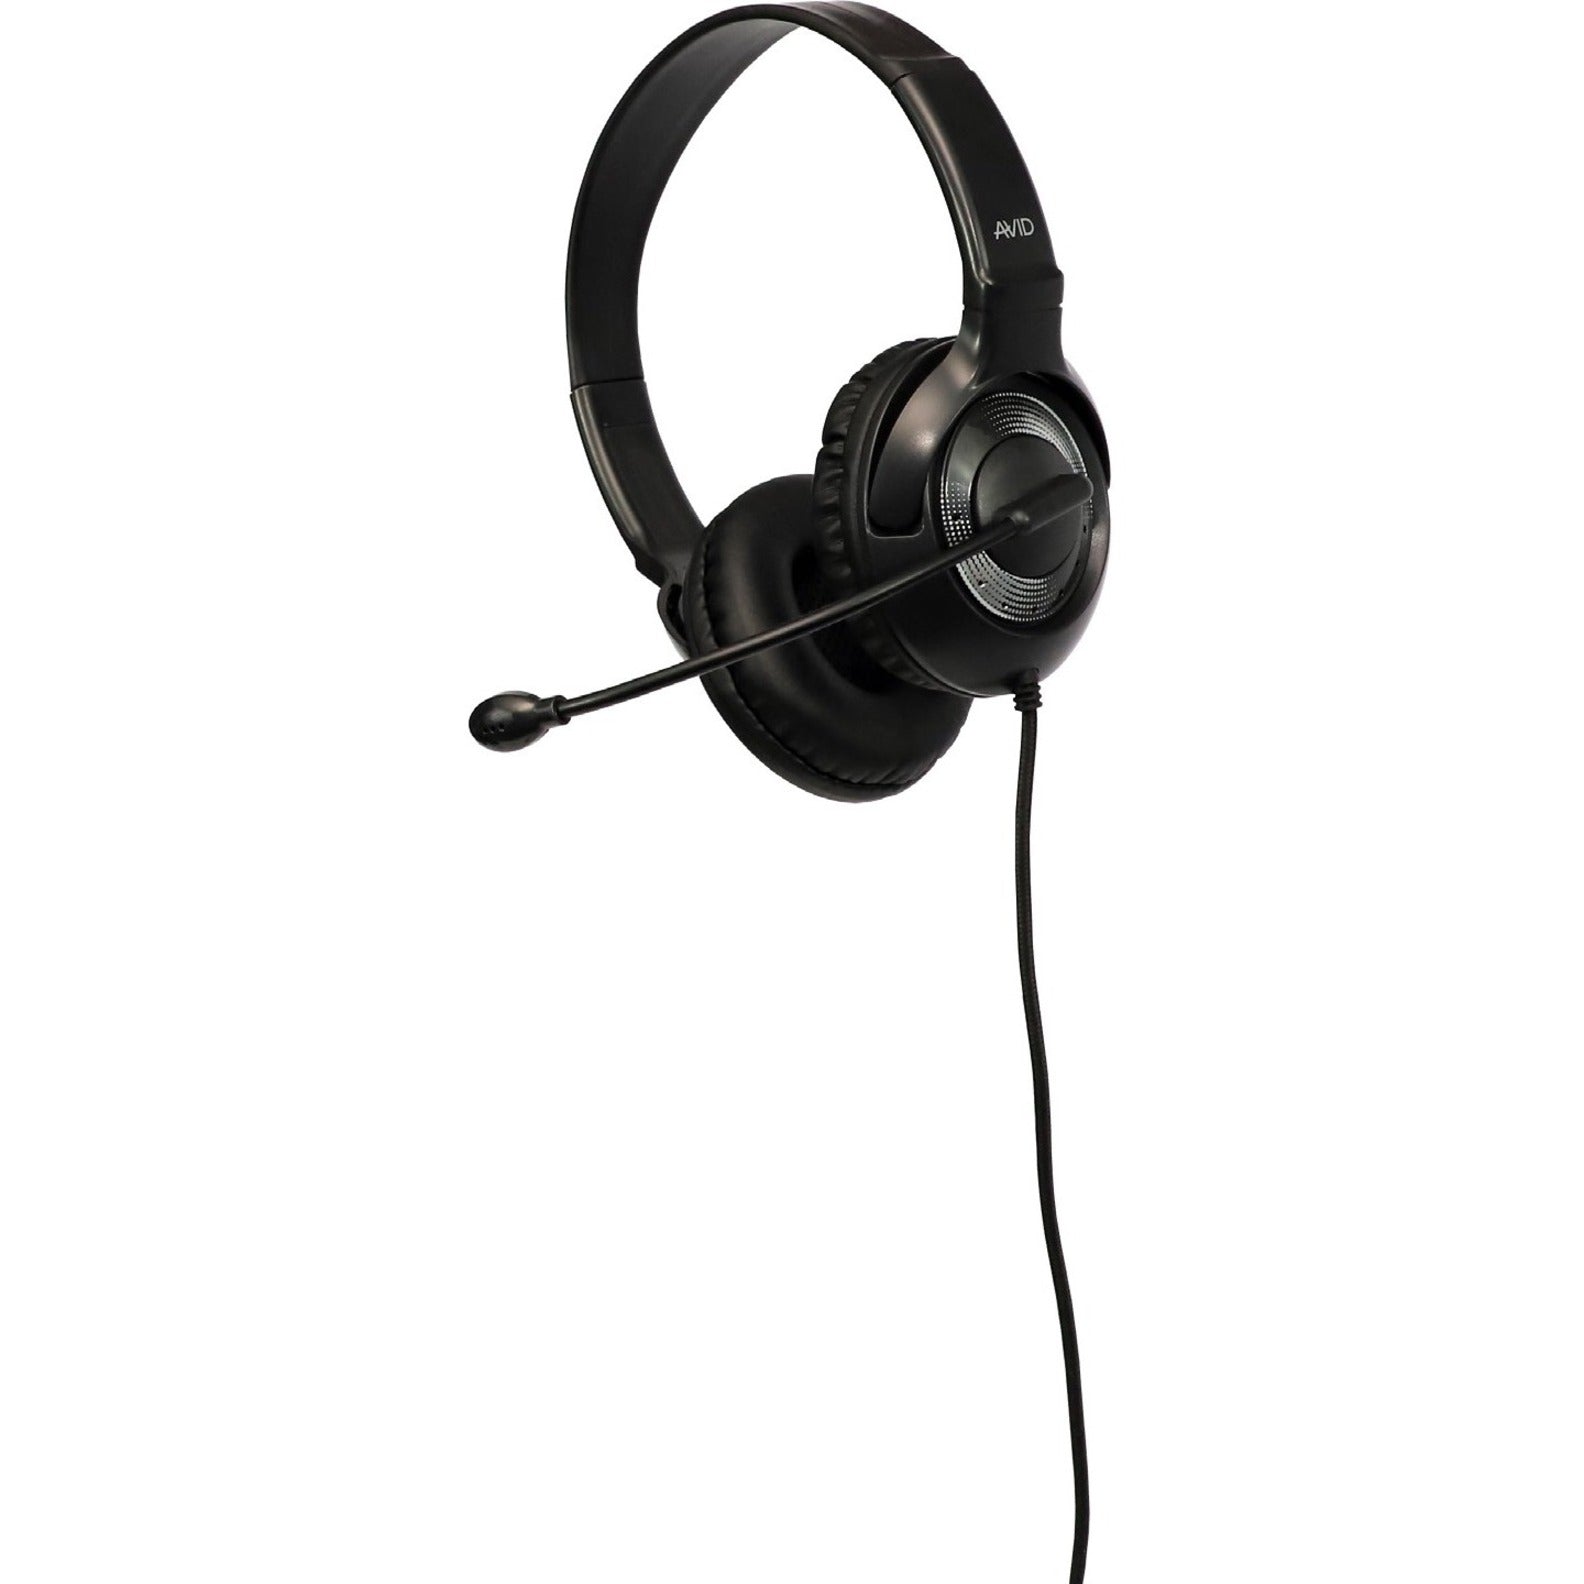 Avid Education 2AE55KLUSB AE-55 Headset, USB Wired Stereo Headset with Noise Cancelling Microphone